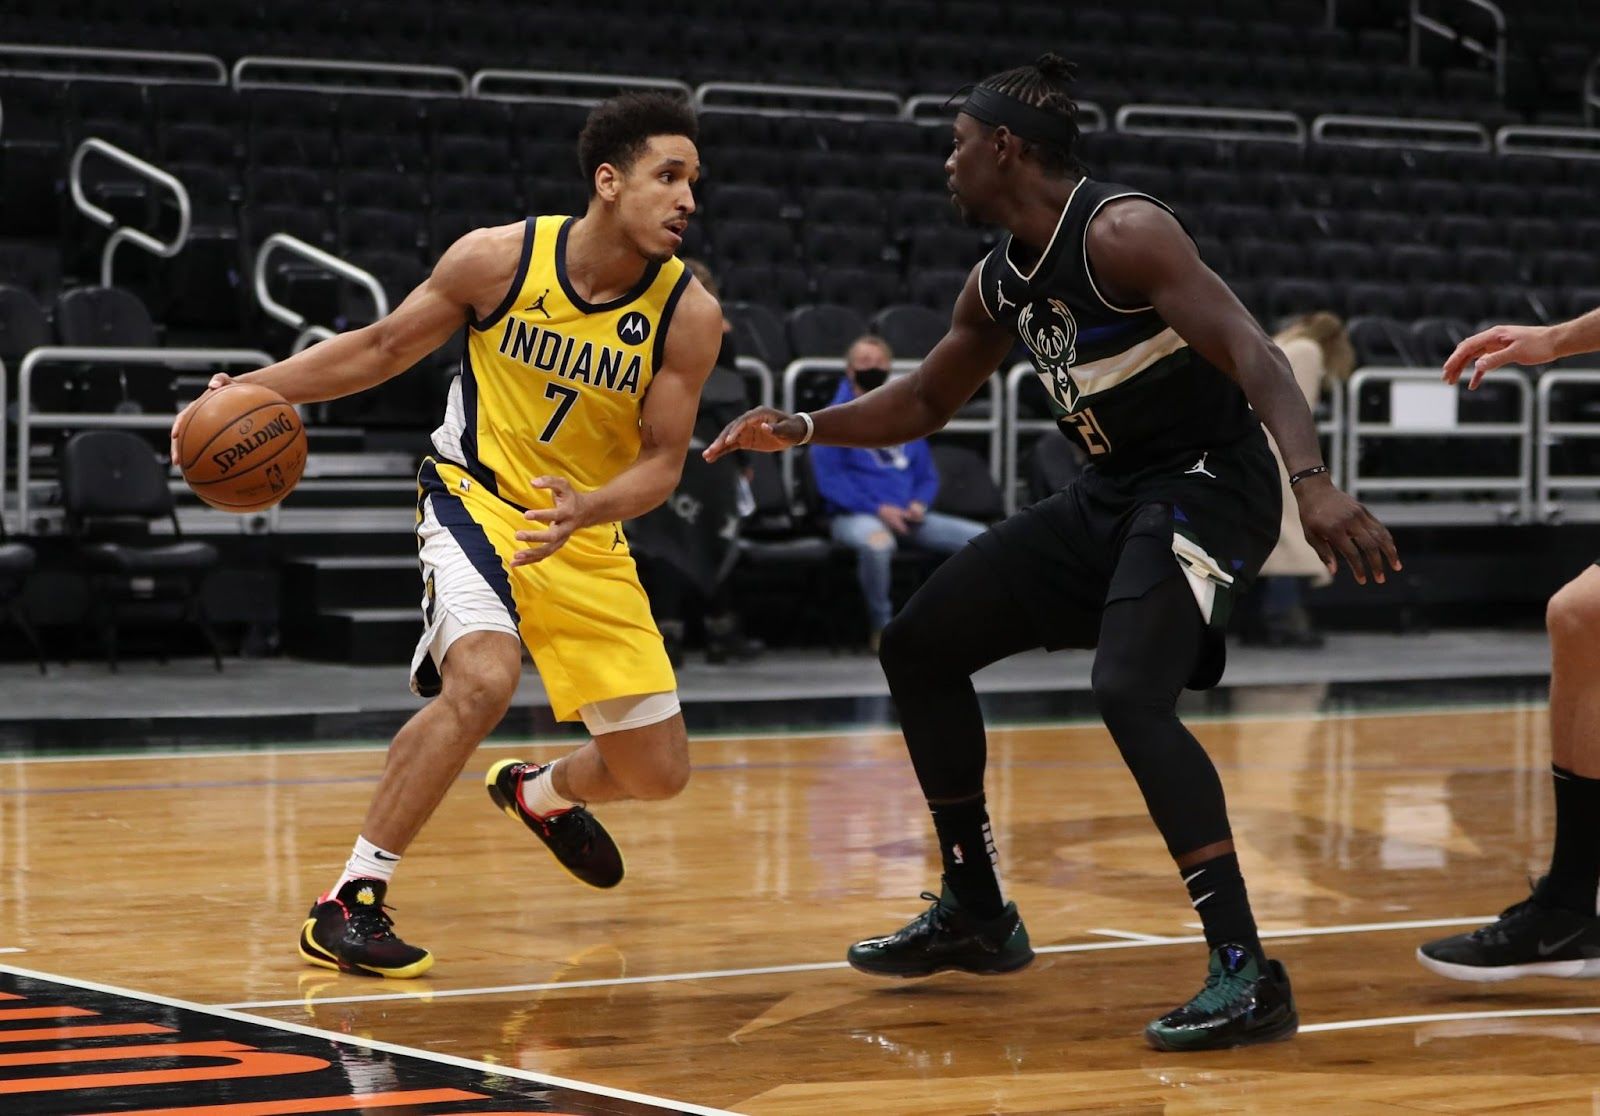 NBA Betting News: Milwaukee Bucks vs Indiana Pacers is an exciting battle